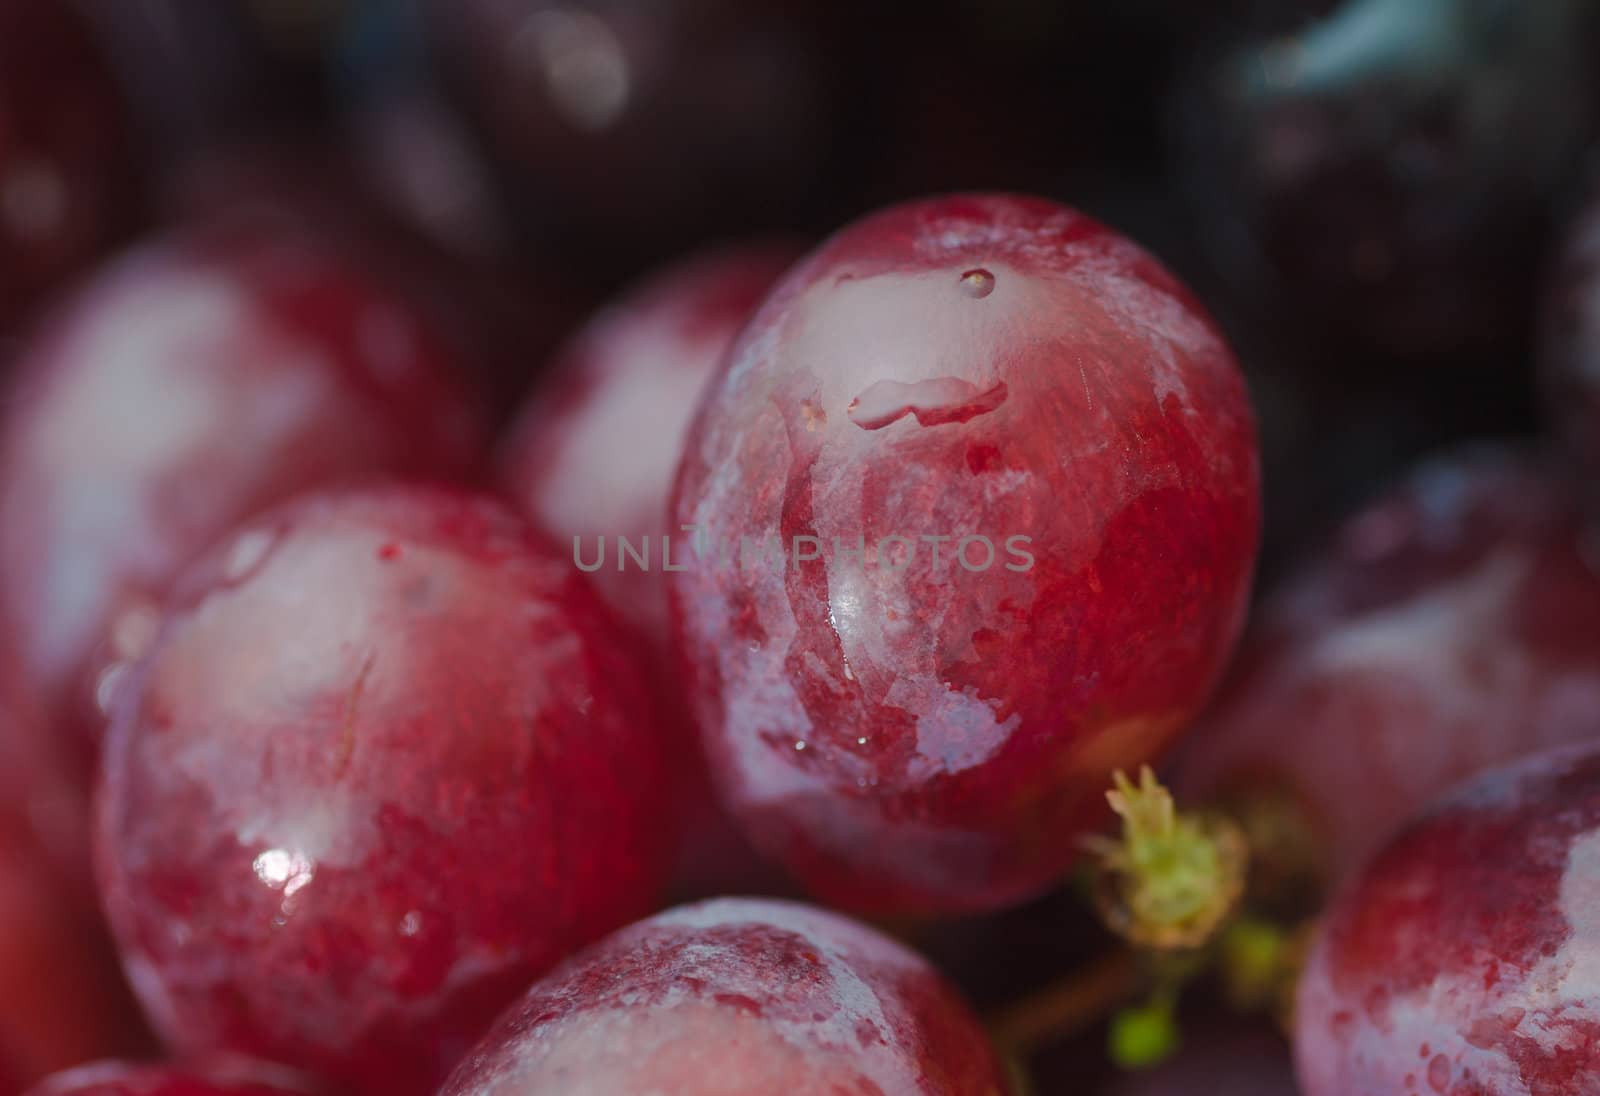  red ripe grapes. Macro photo by docer2000